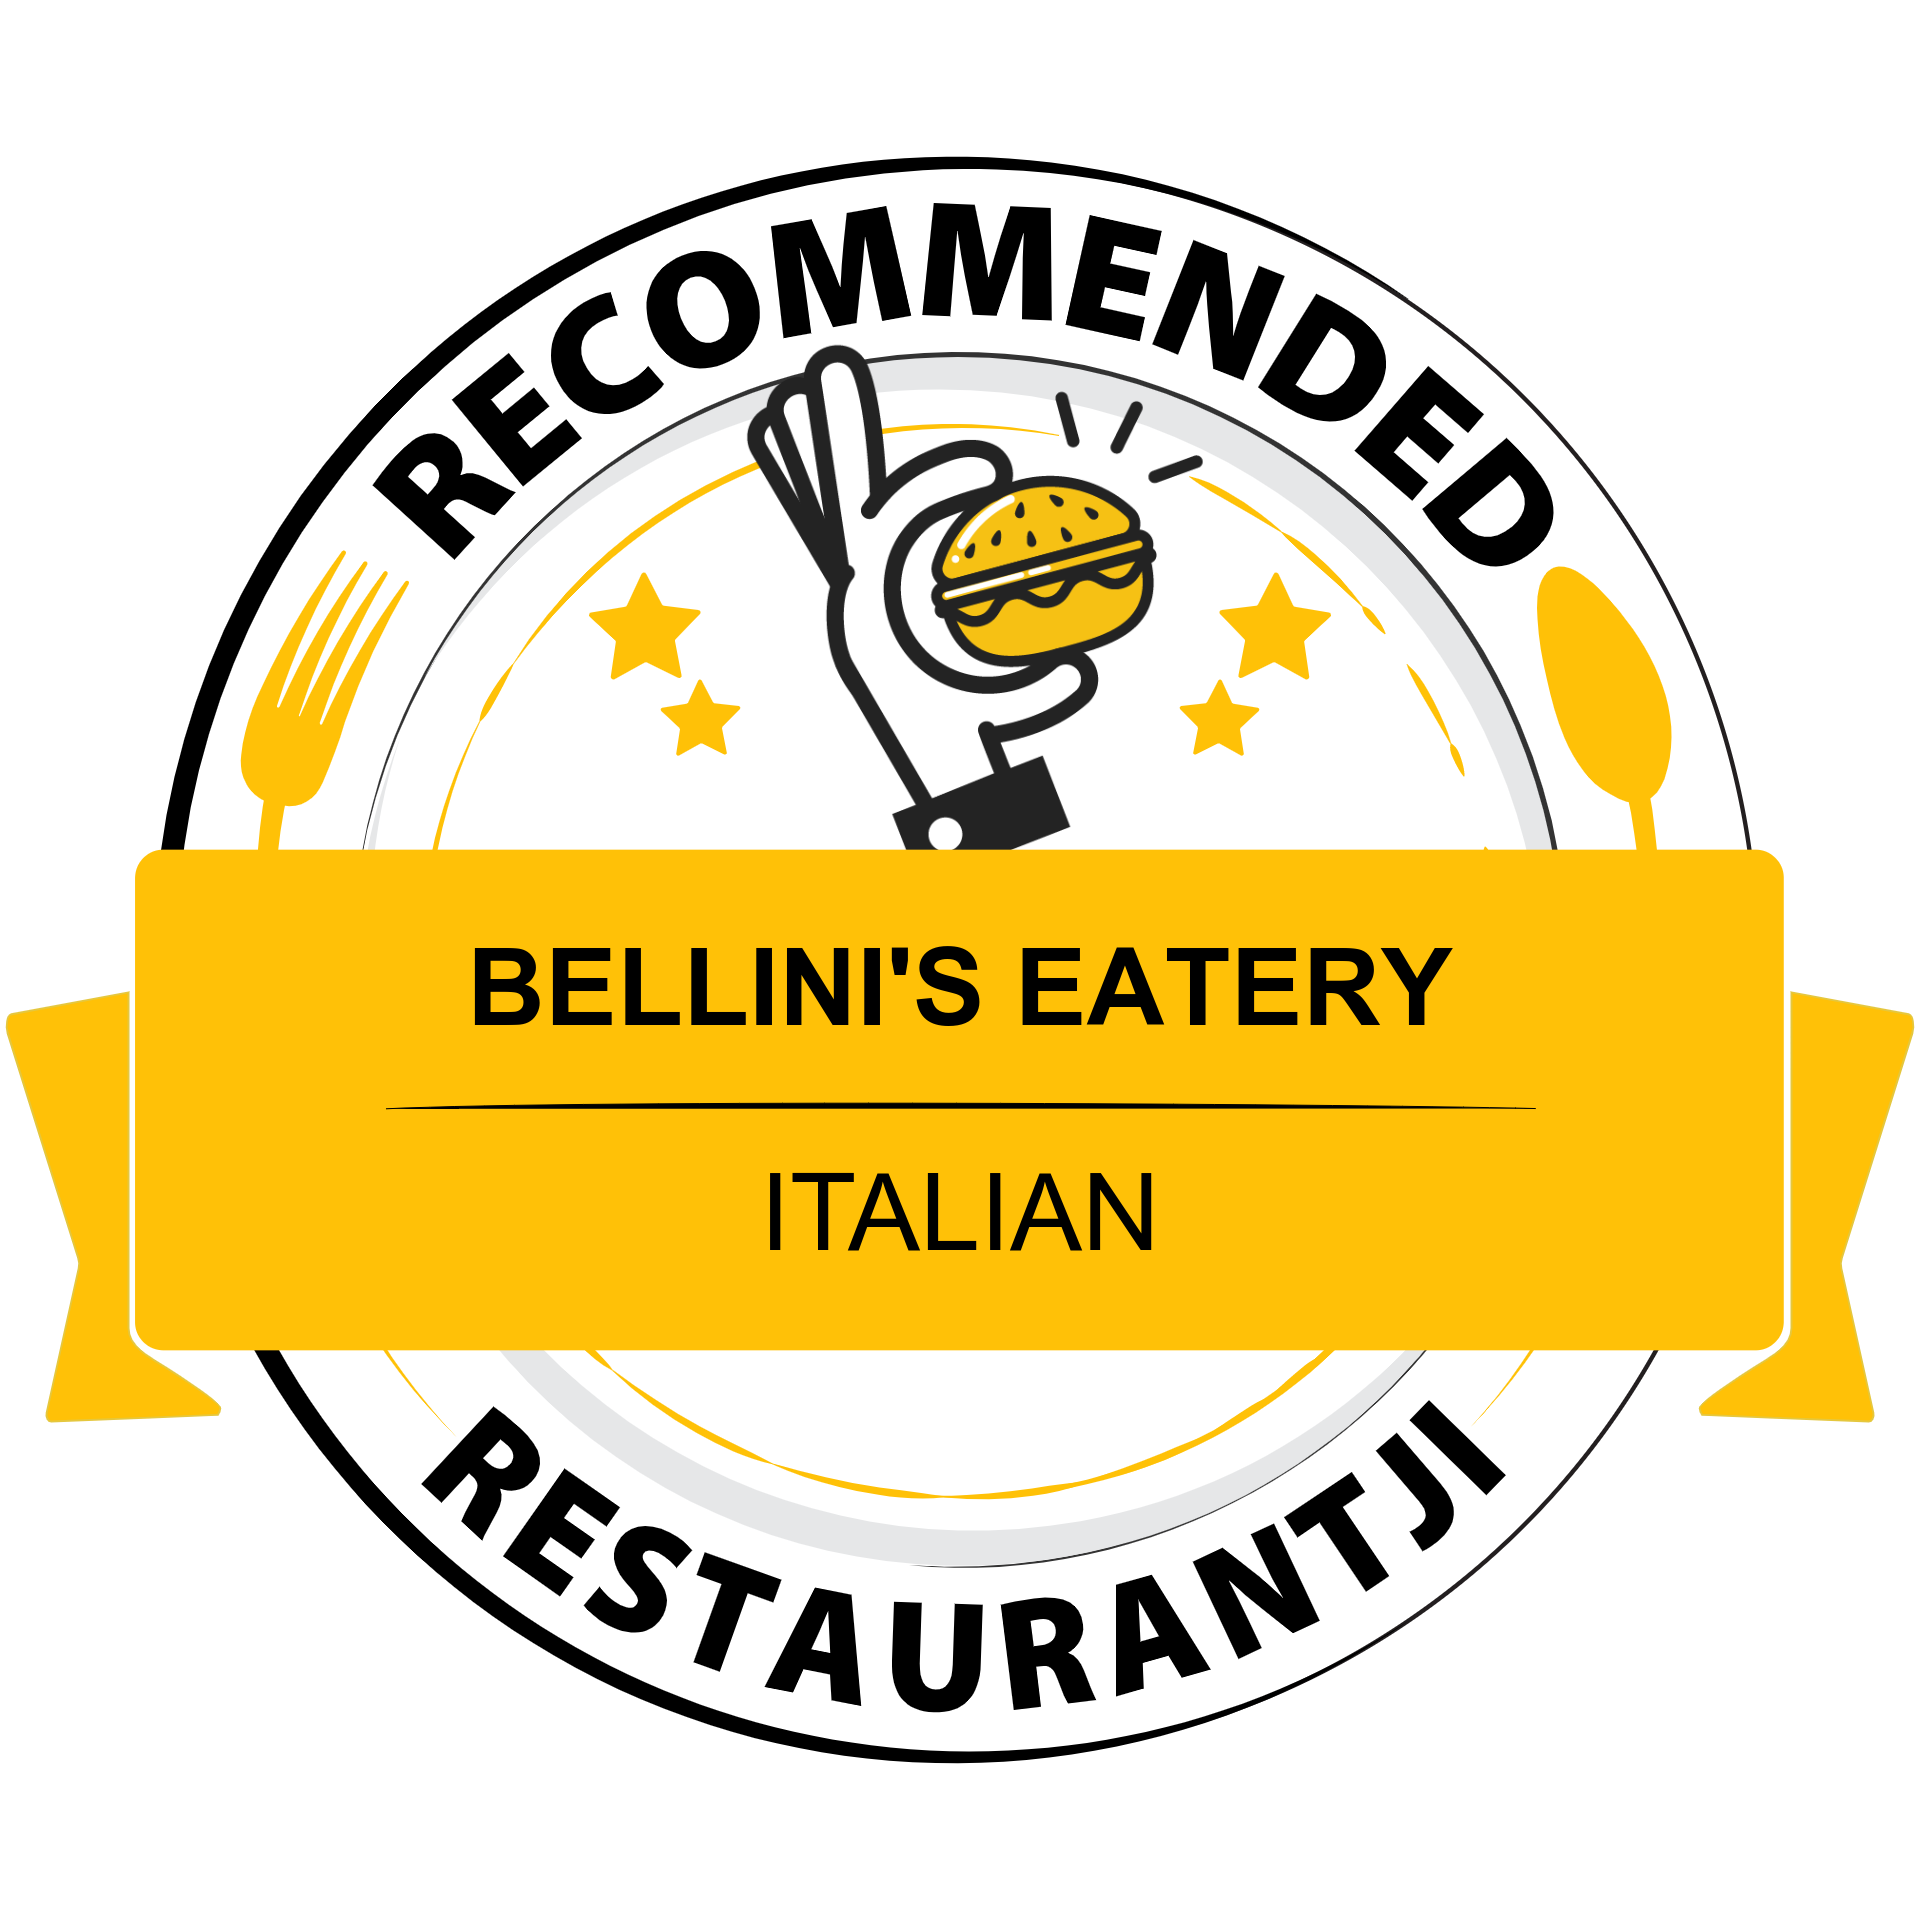 Bellini's Eatery has earned accolades from Restaurantji - your dining guide to local food gems.